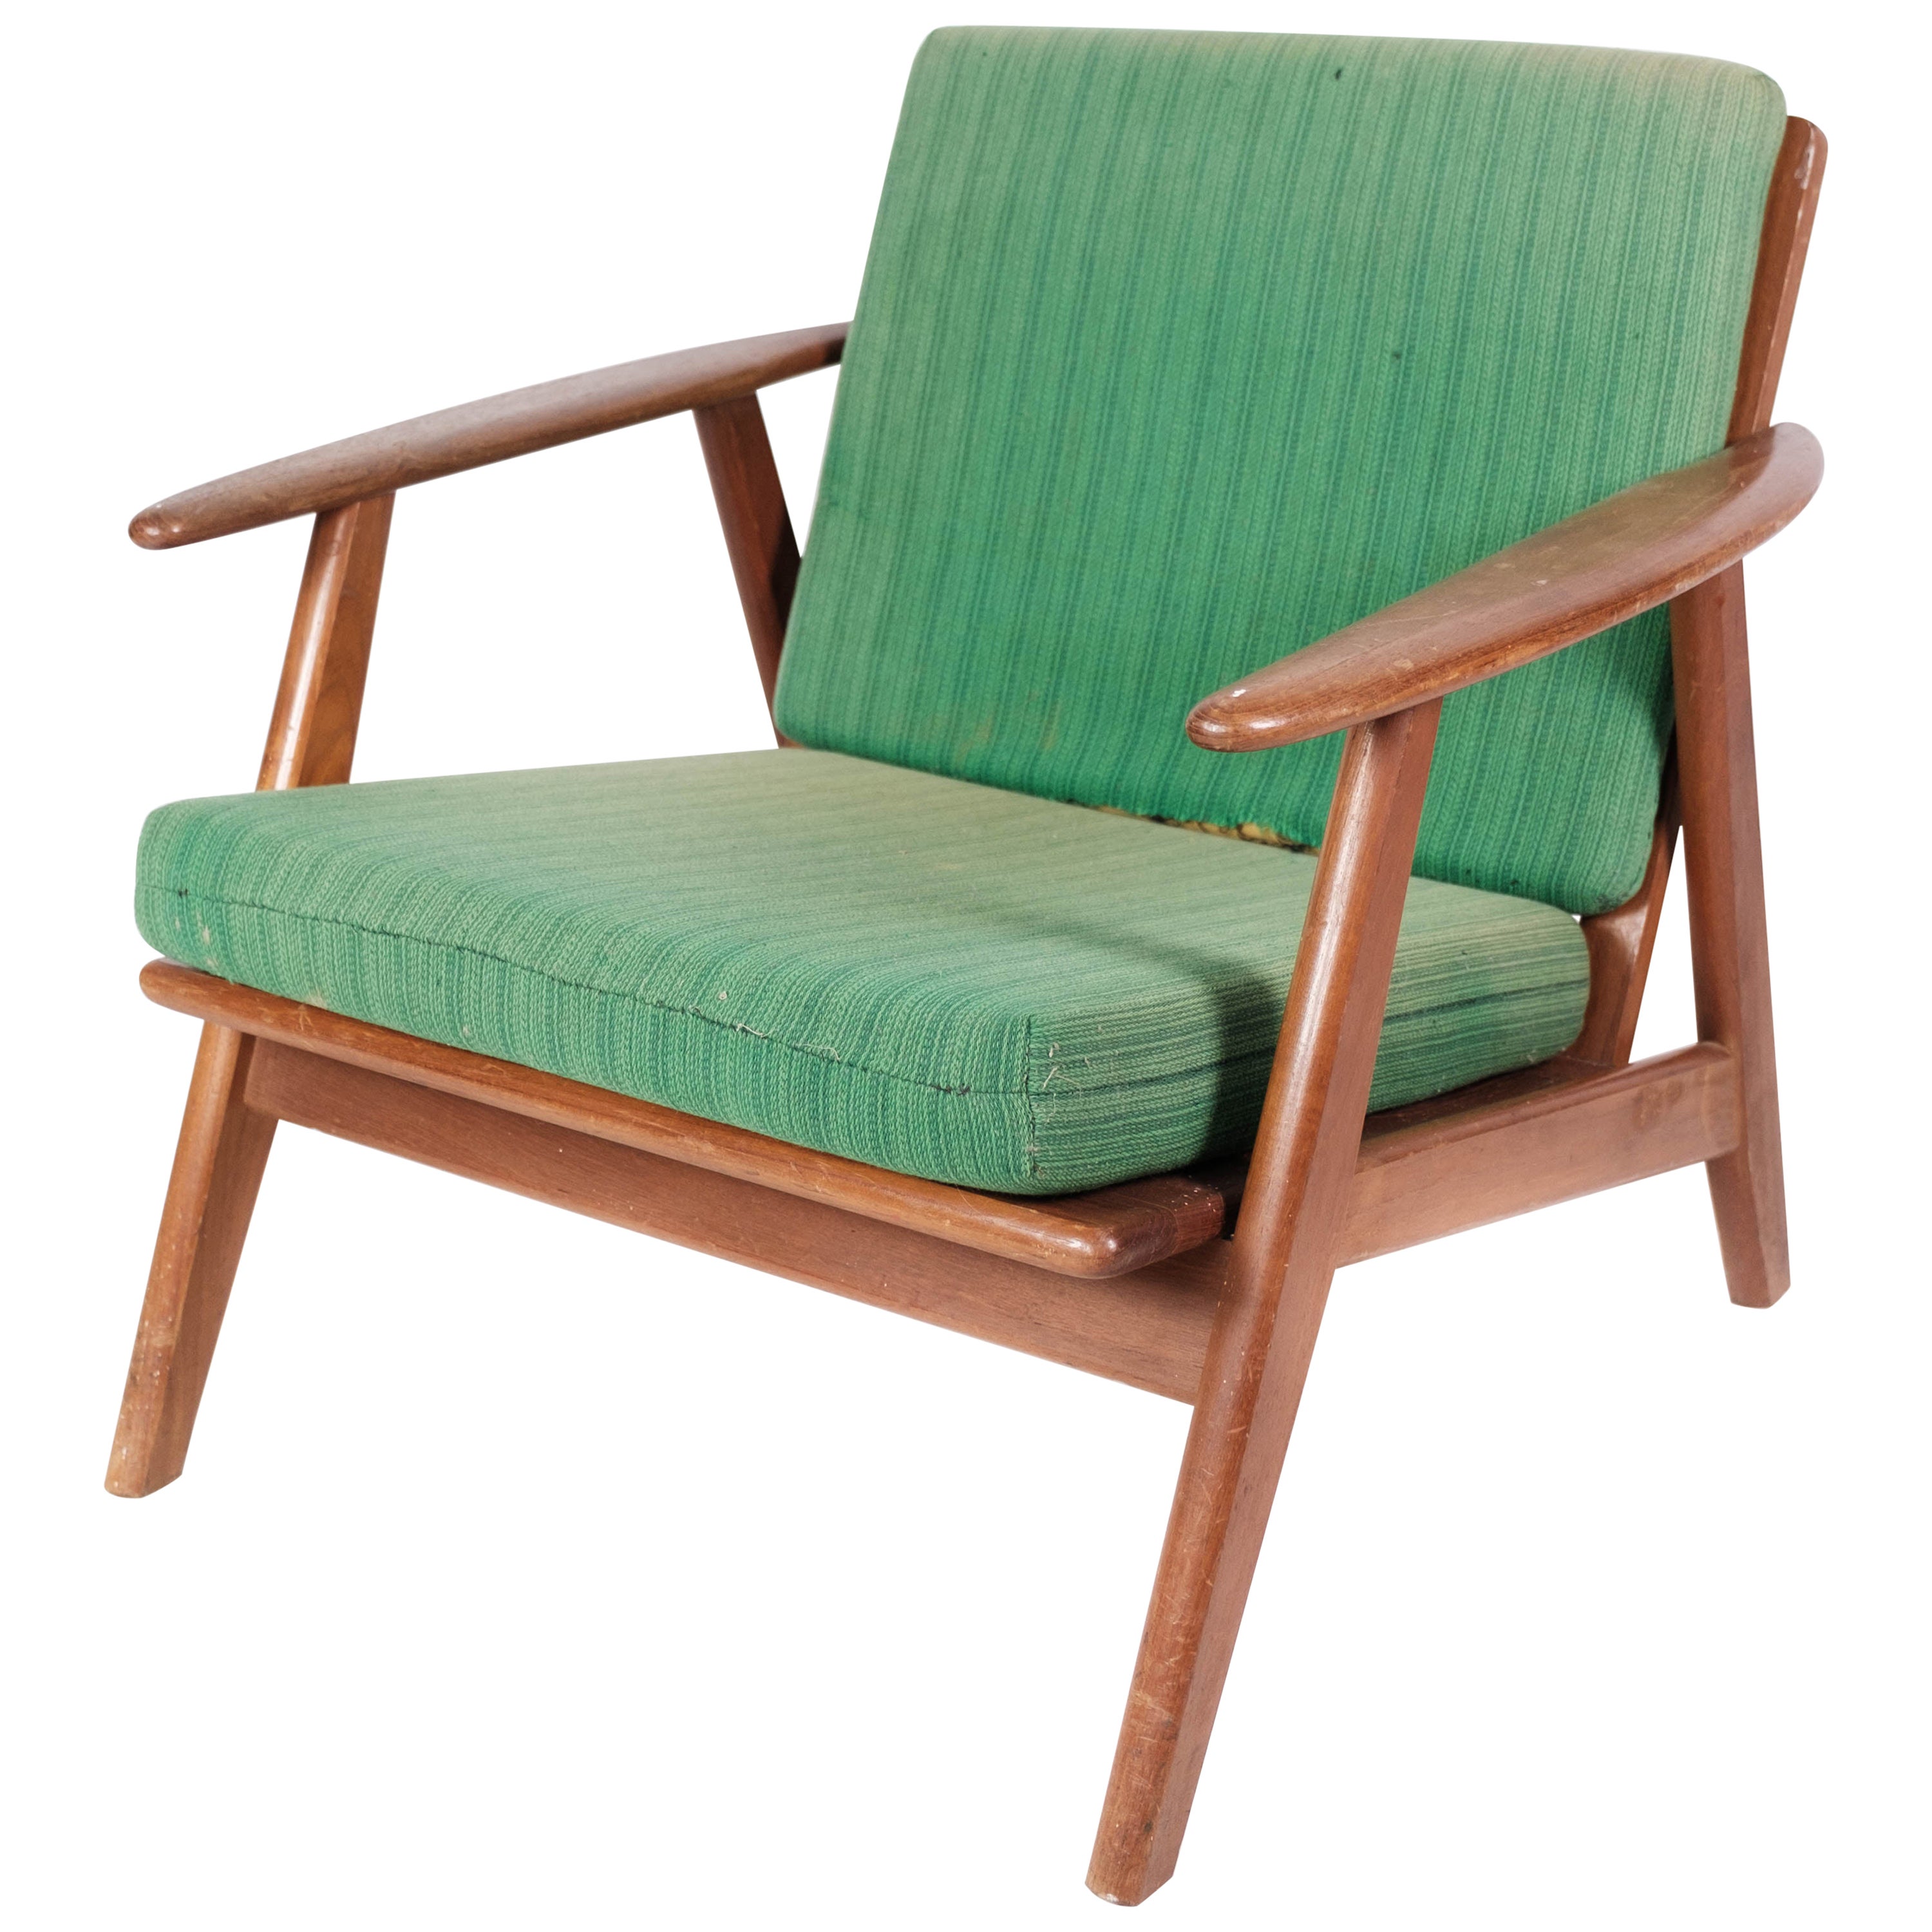 Easy Chair in Teak and with Green Upholstery of Danish Design from the 1960s